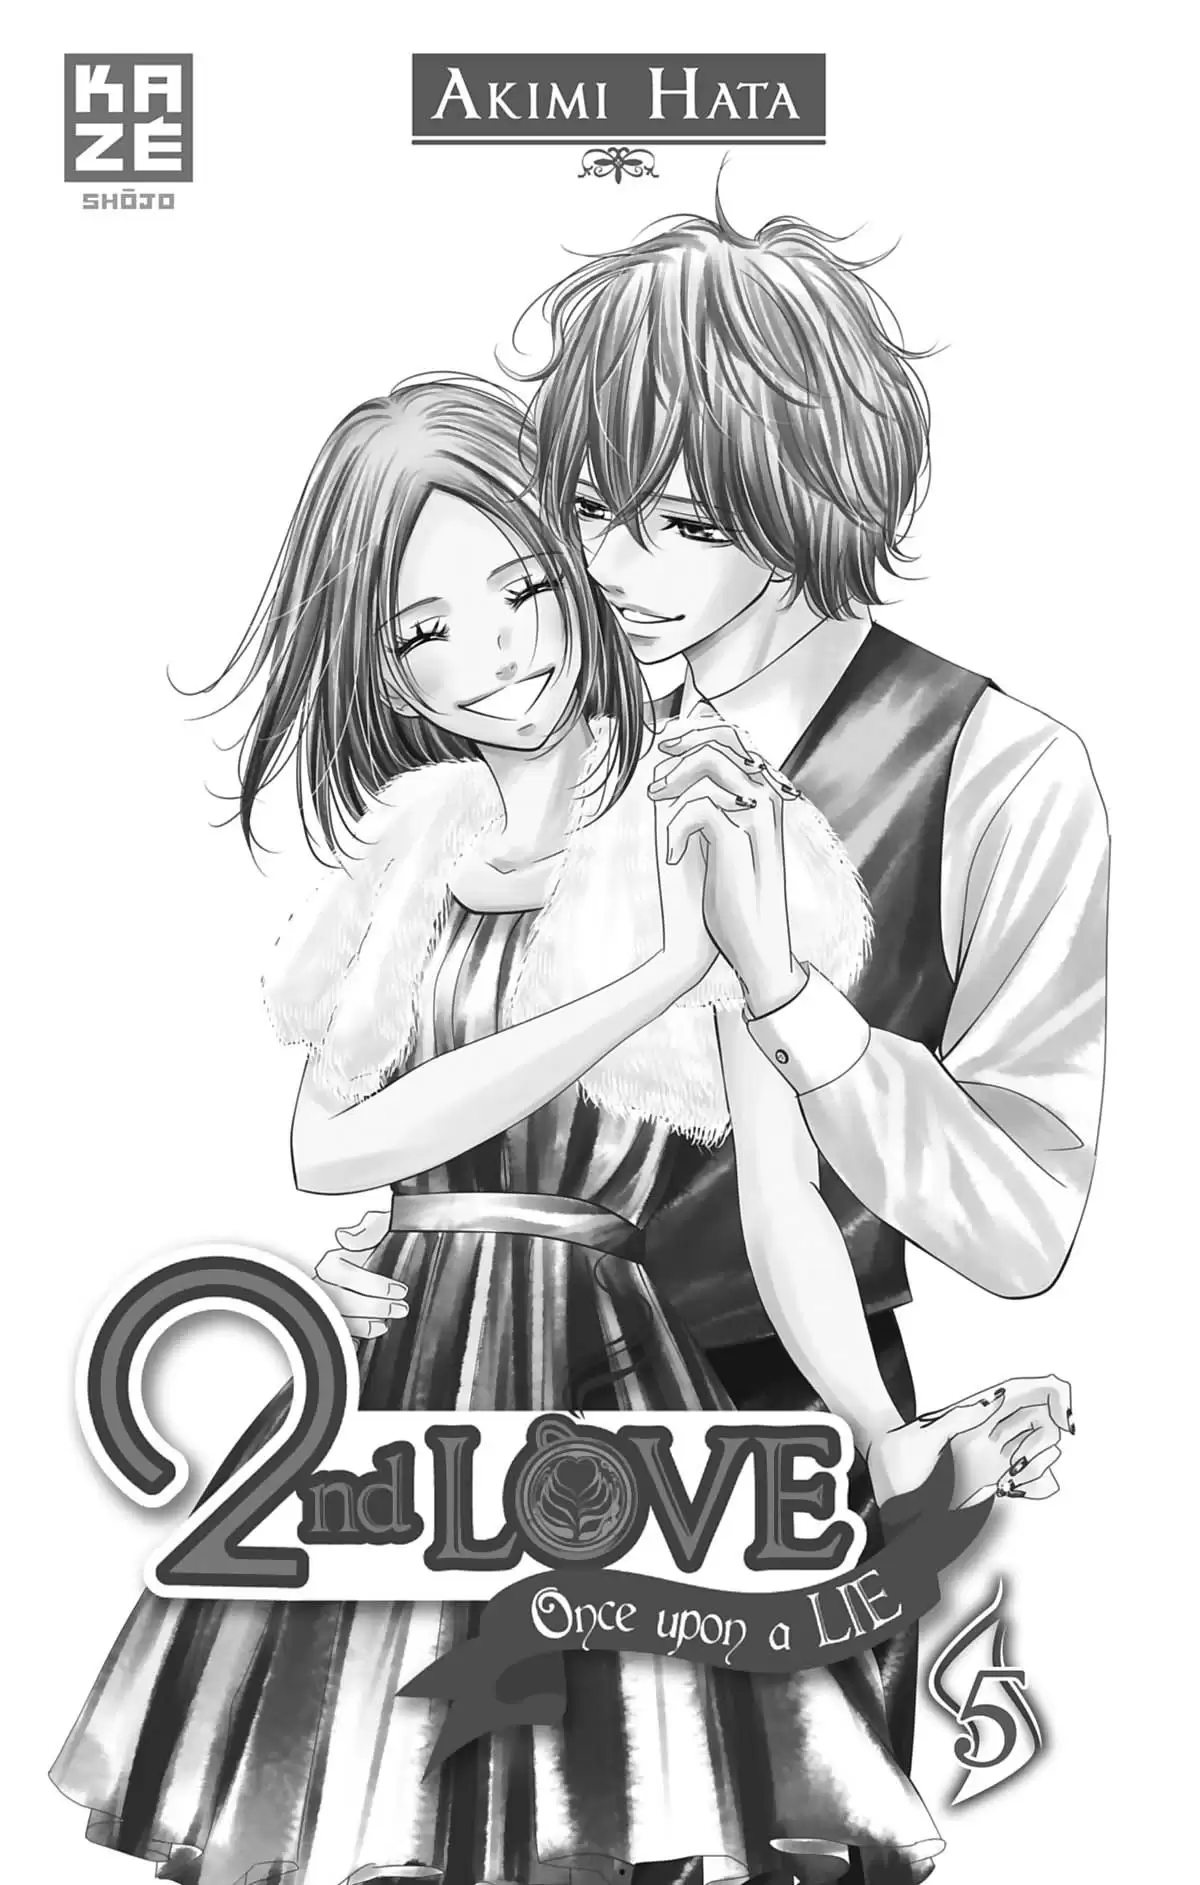 2nd love – Once upon a lie Volume 5 page 2